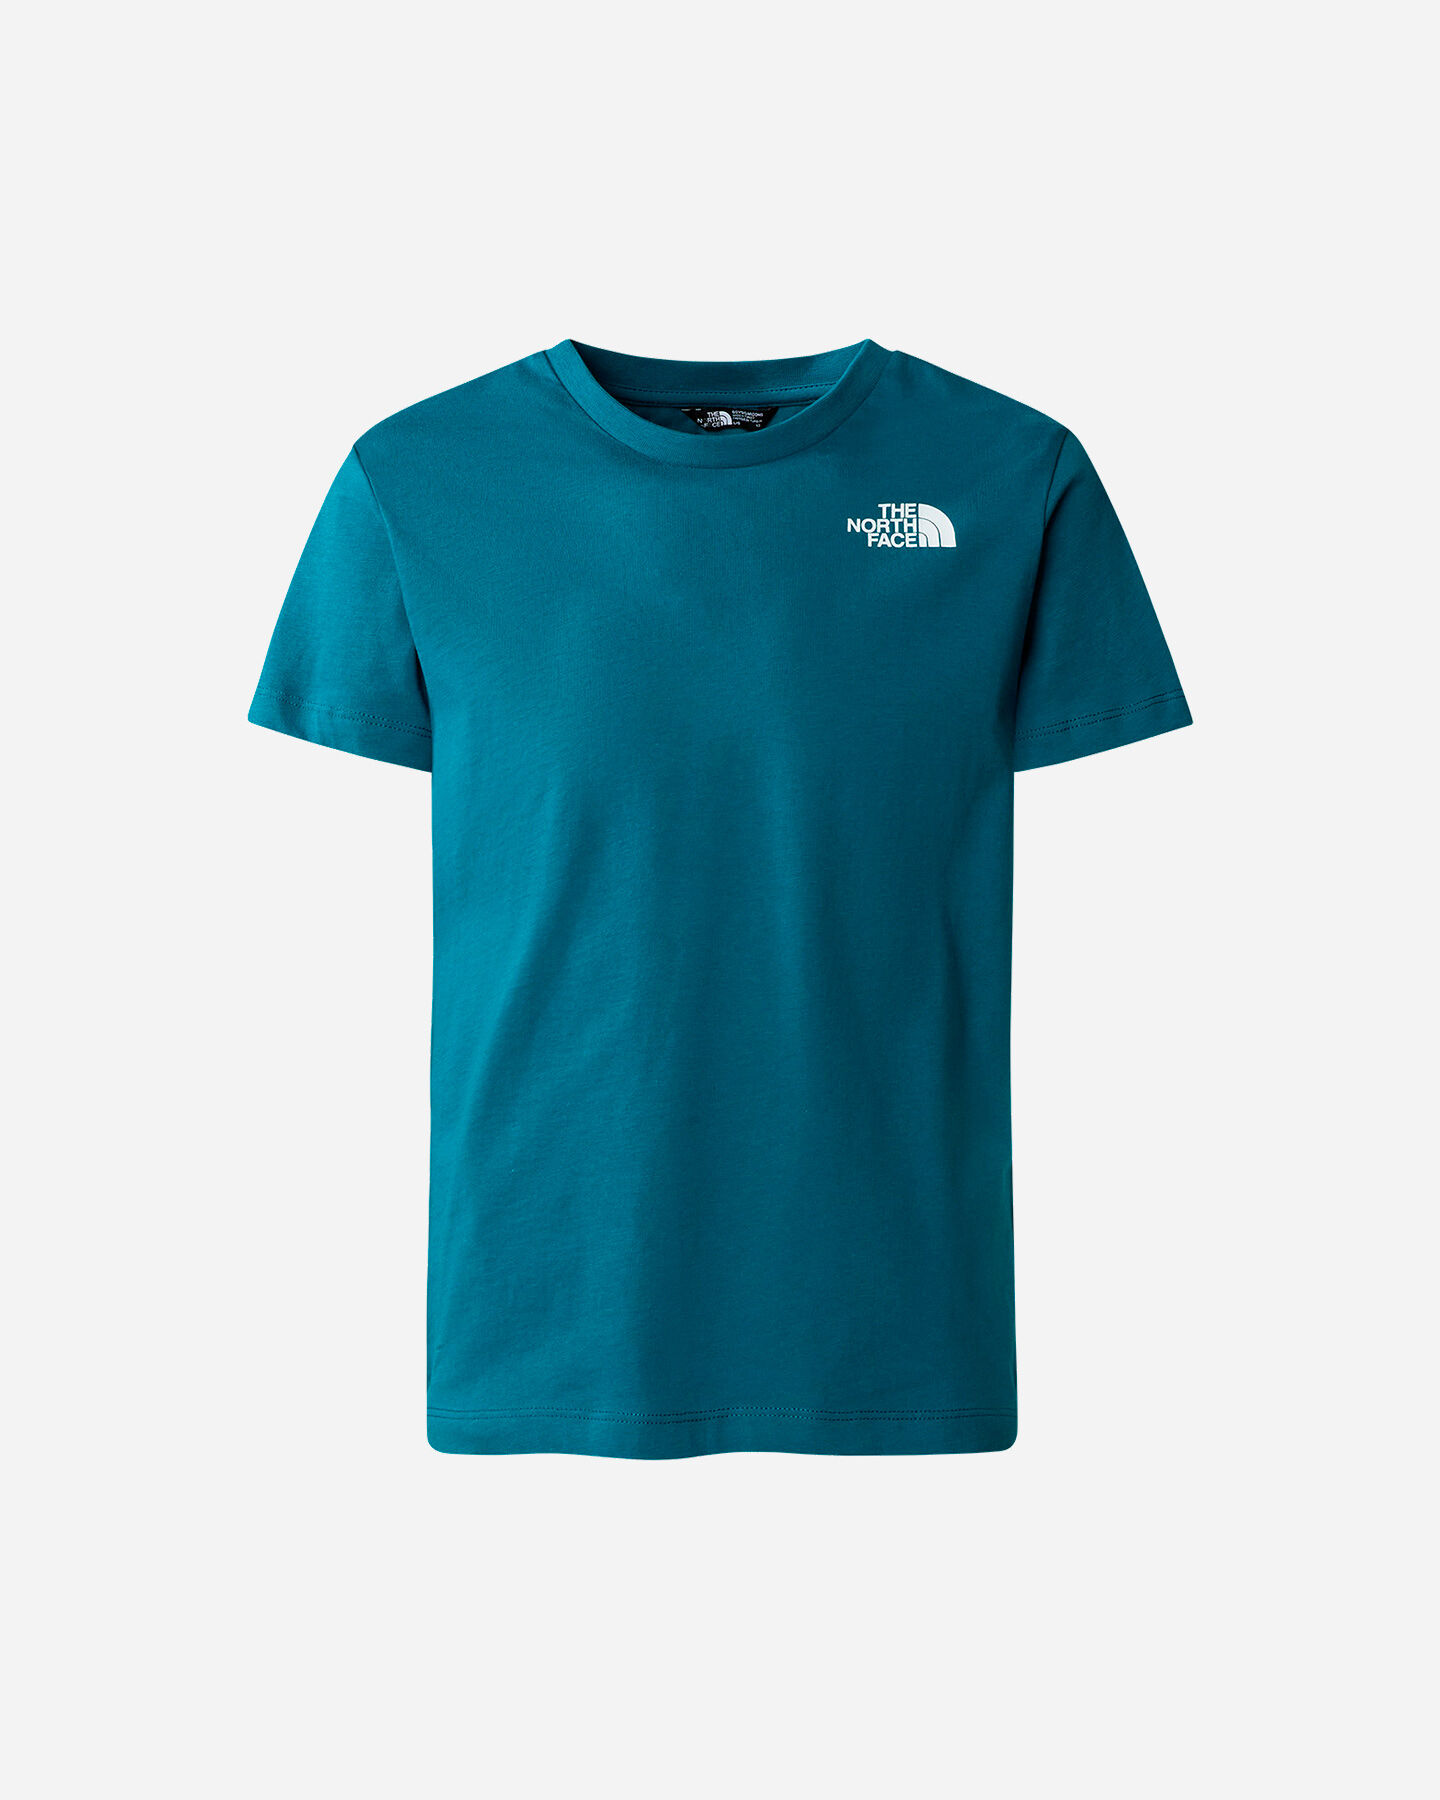  T-Shirt THE NORTH FACE REDBOX TEE BACK JR S5651147|YAO|S scatto 0